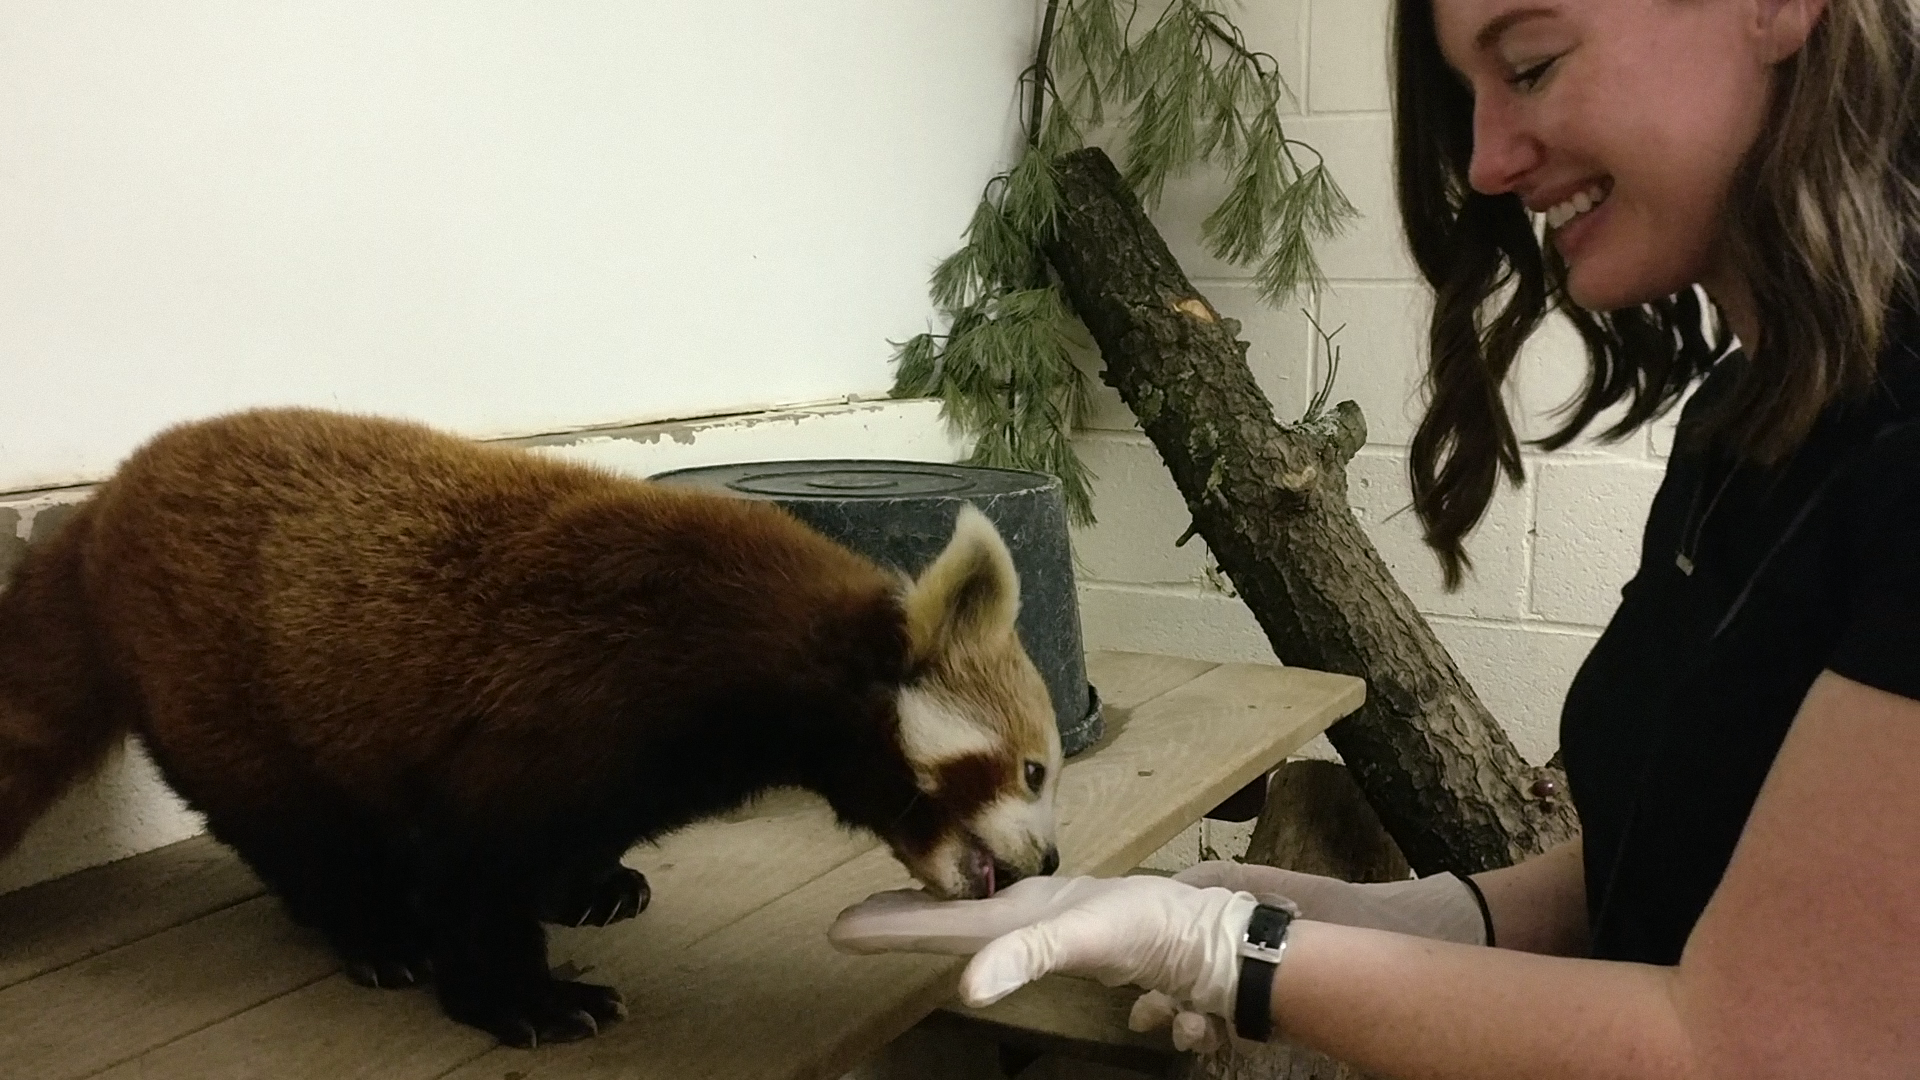 Alyssa feeds a red panda out of the palm of her hand